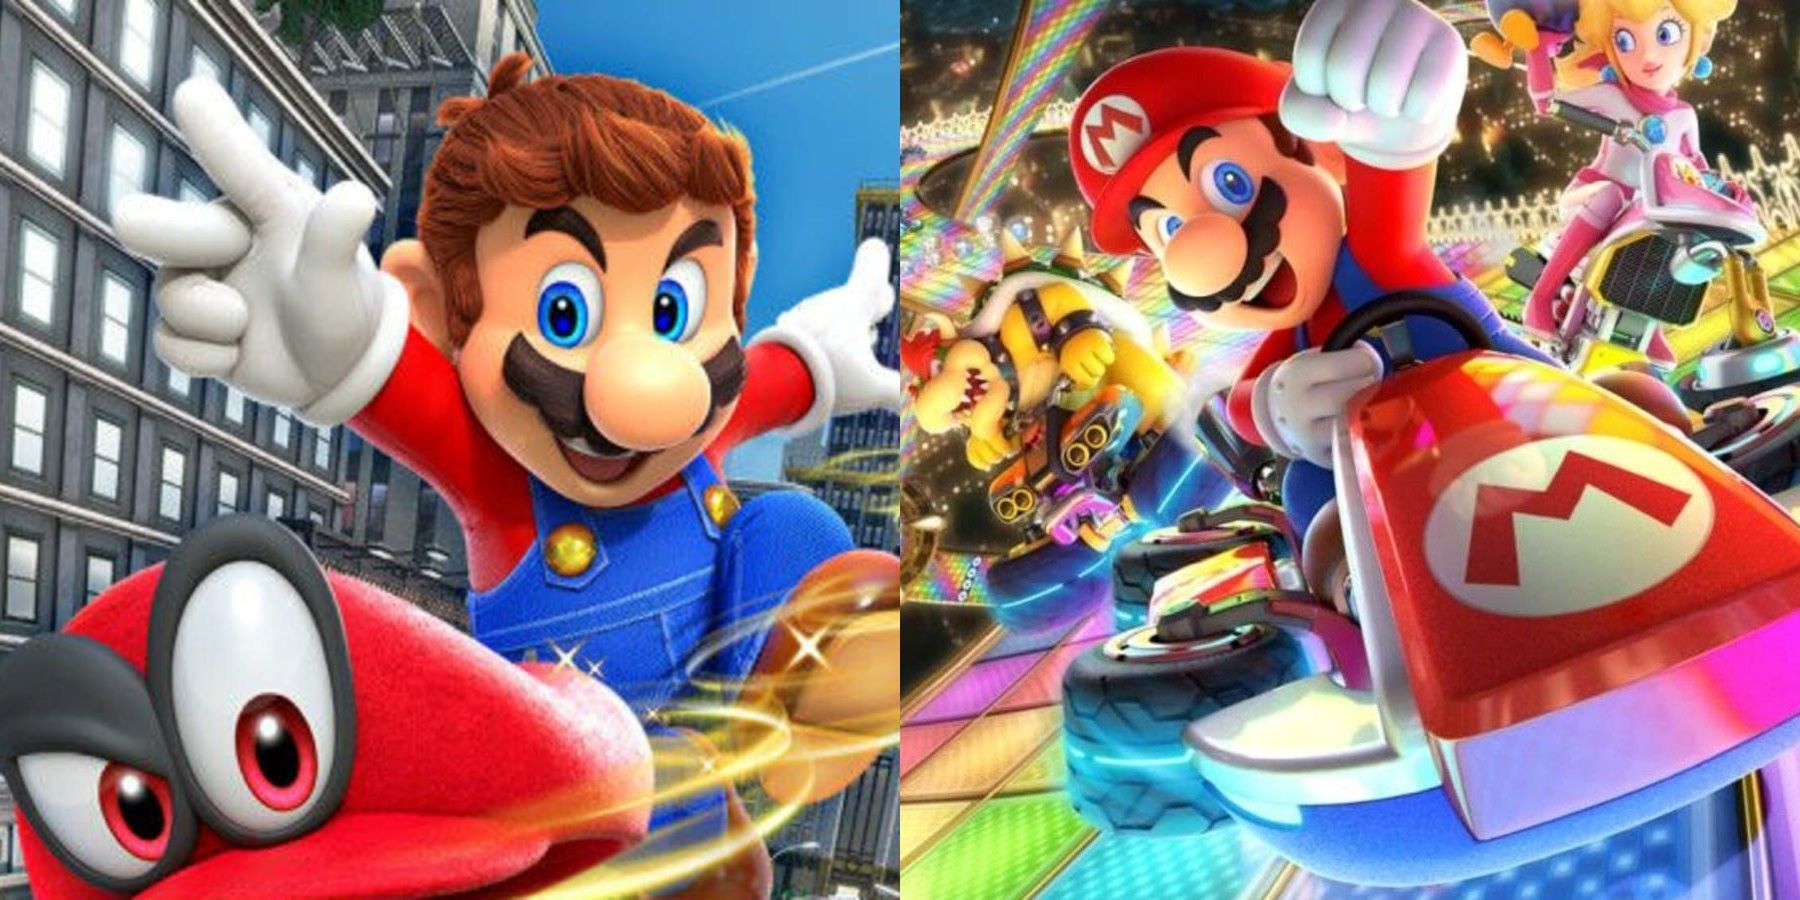 Mario and Cappy in Super Mario Odyssey next to Mario, Peach, and Bowser in Mario Kart 8 Deluxe